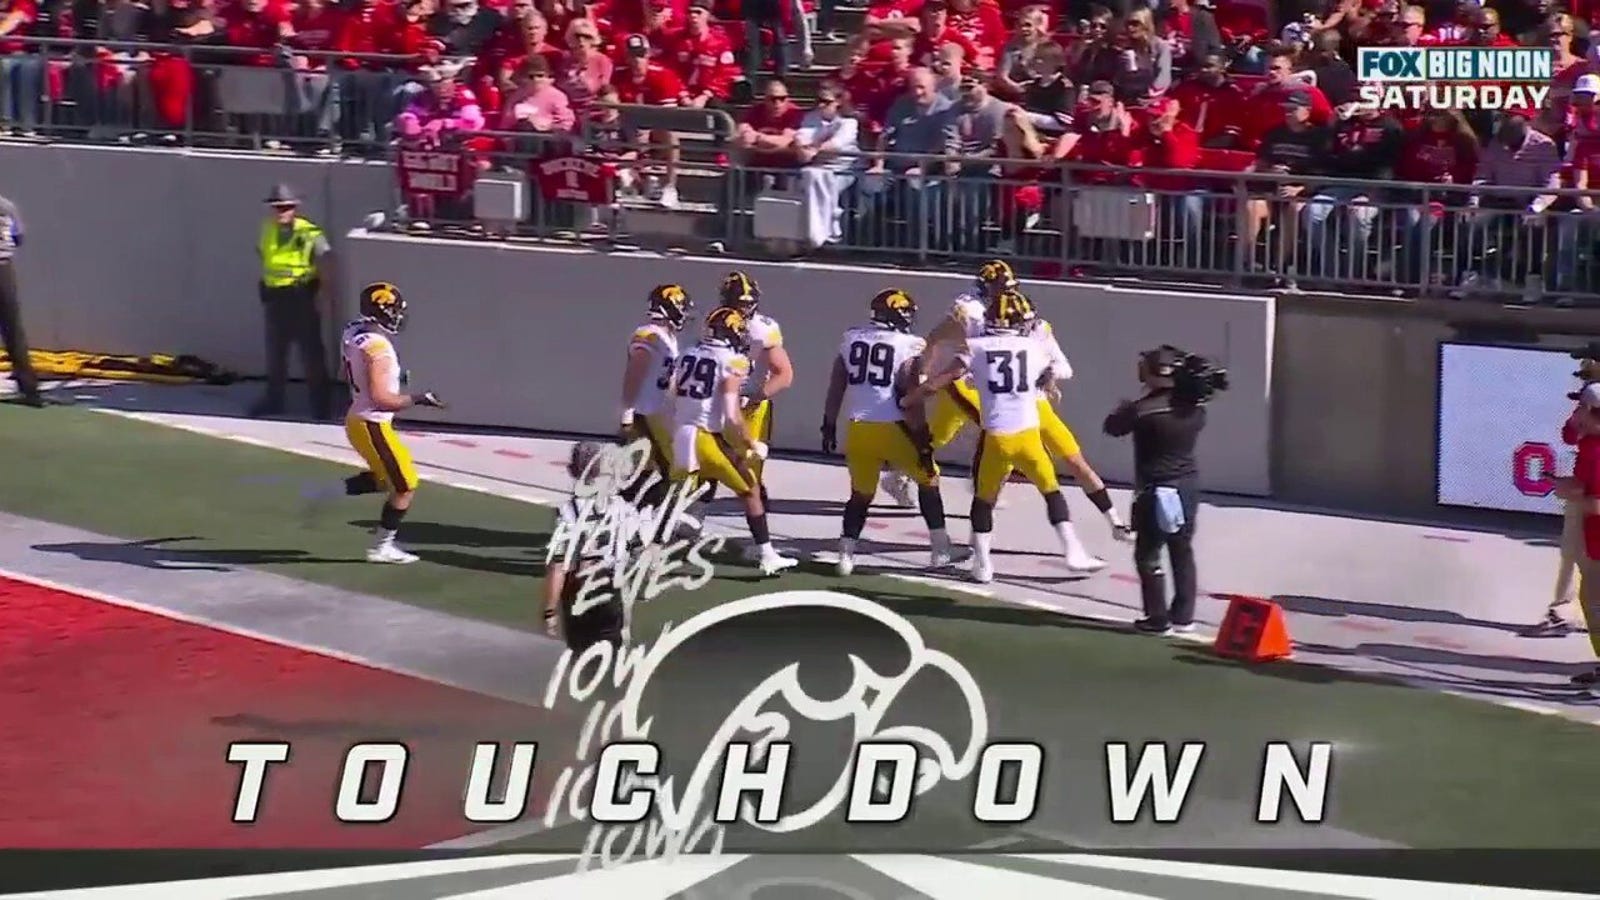 Defense sparks Iowa to early lead vs. Ohio State